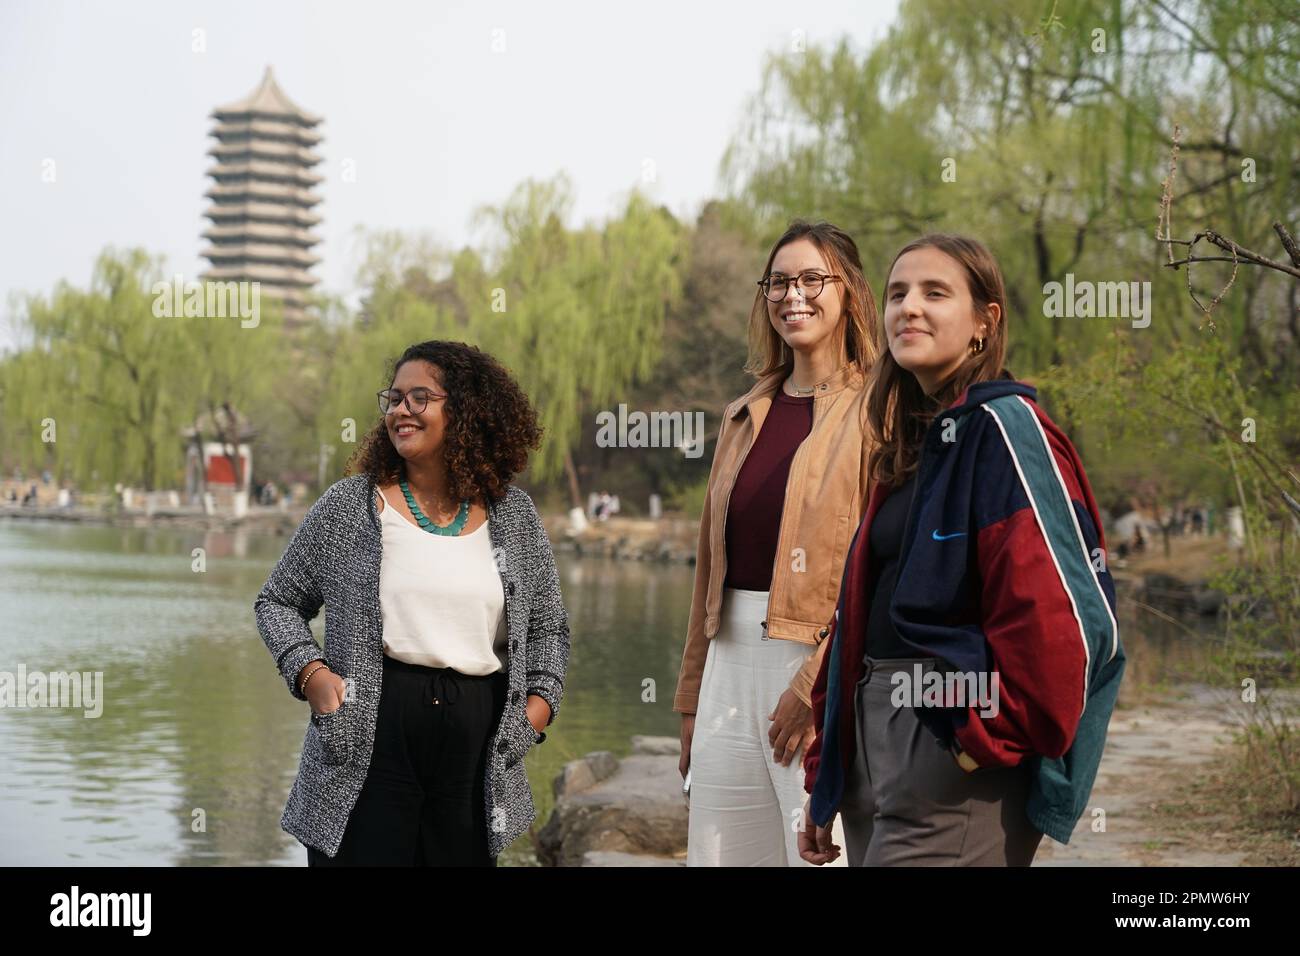 (230415) -- BEIJING, April 15, 2023 (Xinhua) -- Rafaela (L), Manuela (C) and Maria pose for a photo near the Weiming Lake of Peking University in Beijing, capital of China, March 31, 2023. Maria Eduarda Variani, Rafaela Viana dos Santos, Manuela Boiteux Pestana, and Marco Andre Rocha Germano are Brazilian students studying in the Master of China Studies program at the Yenching Academy of Peking University in China. The four of them have been interested in Chinese culture since they were young. After arriving in Beijing, they have been impressed by the Chinese capital's profound cultural he Stock Photo